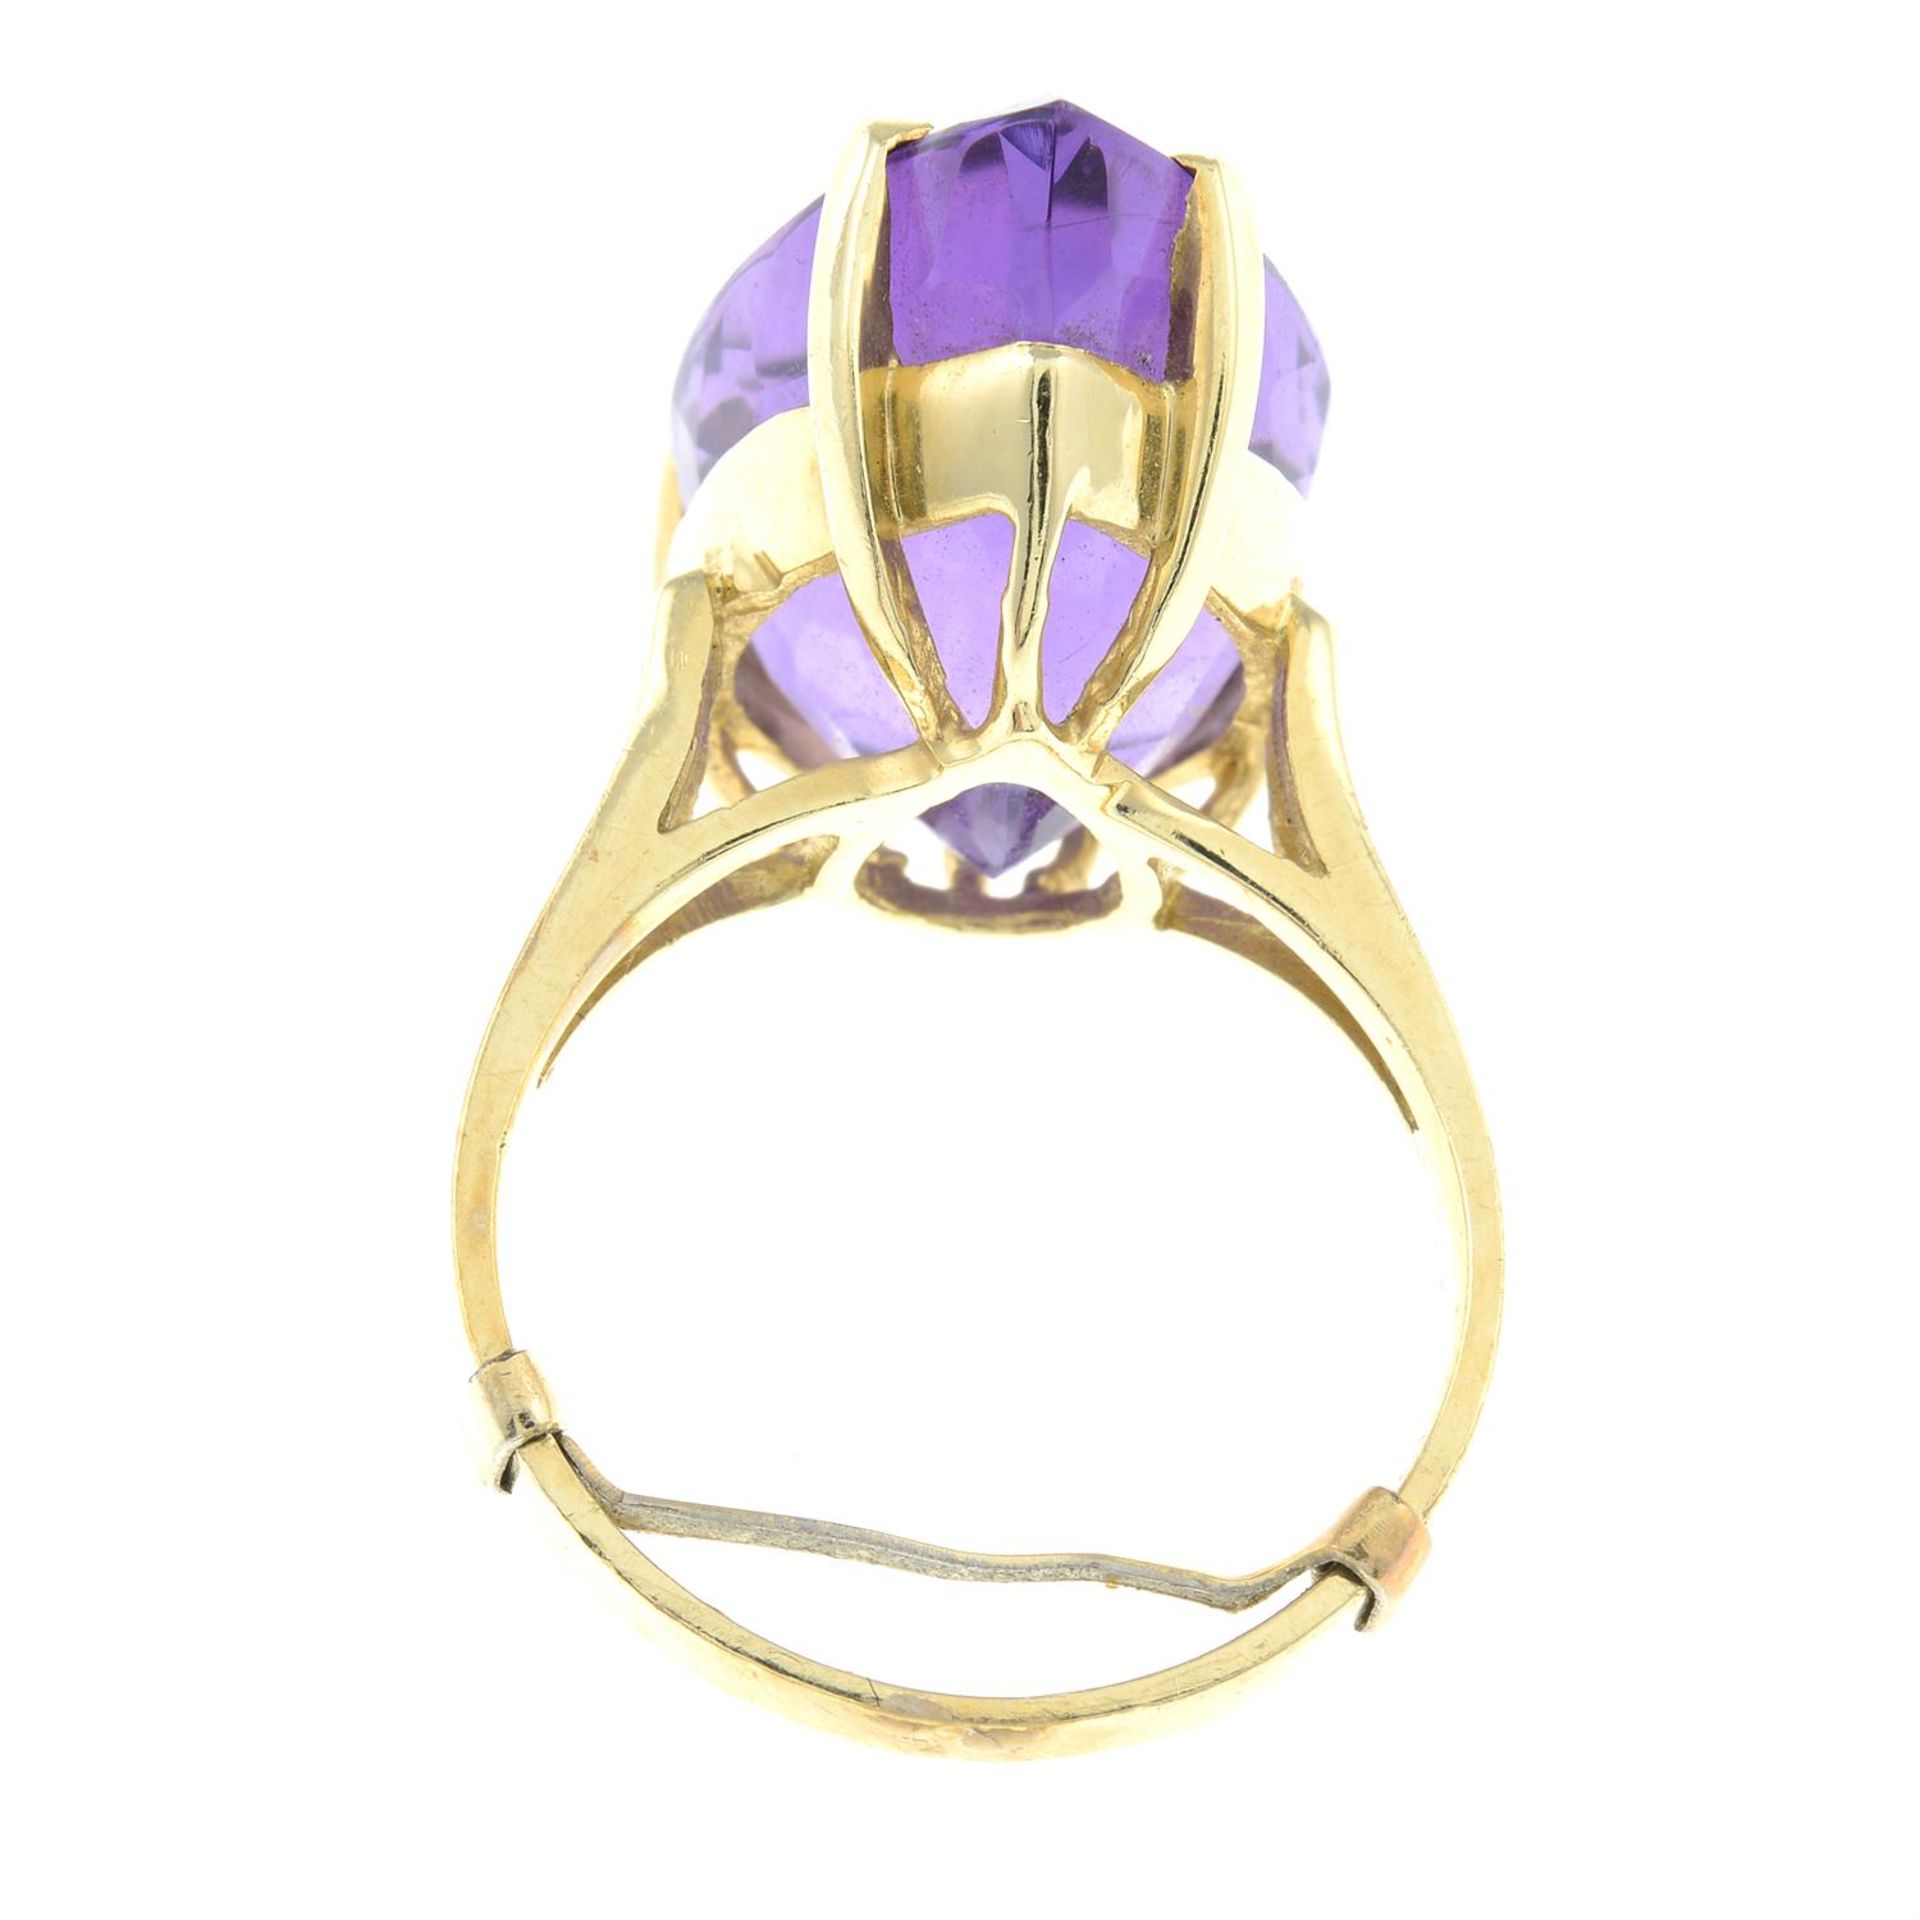 An amethyst dress ring. - Image 2 of 2